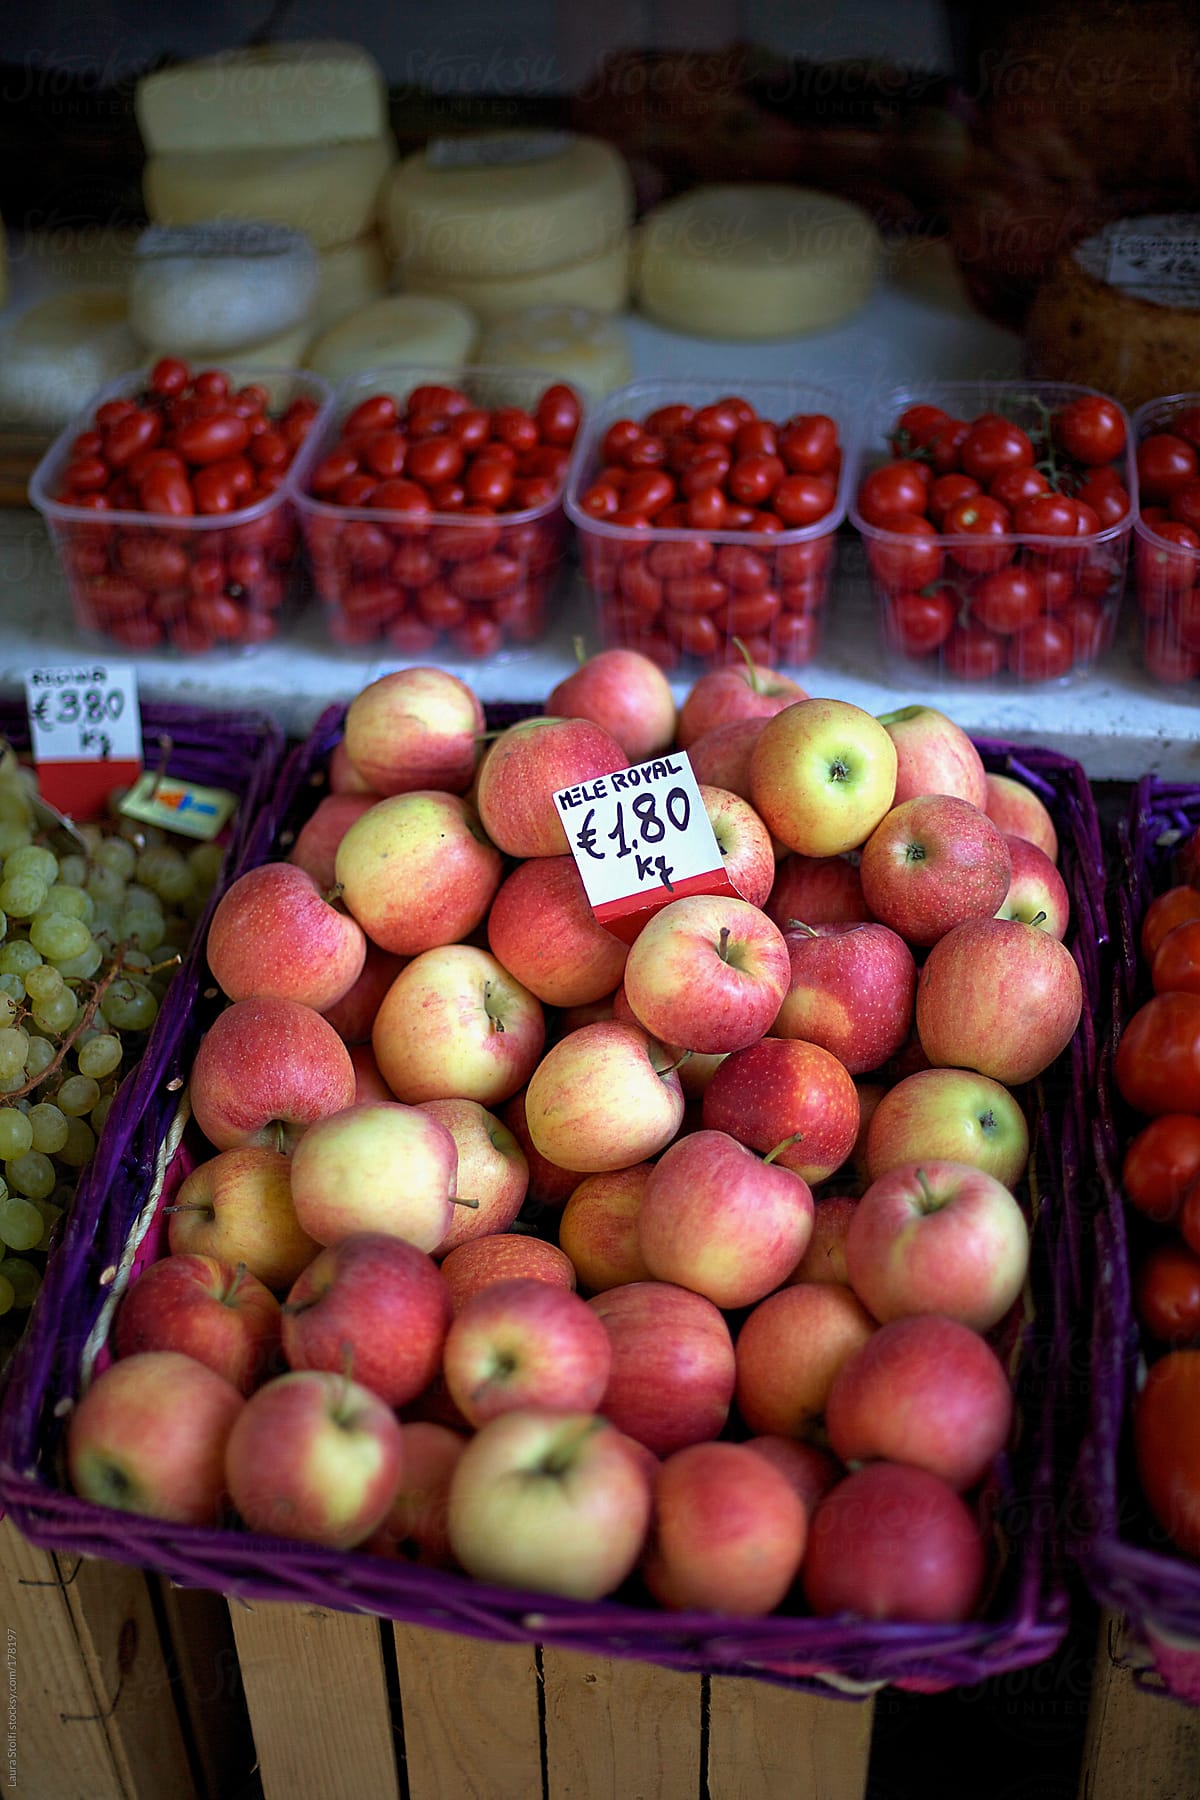 Royal apples for sale at grocery shop in Italy